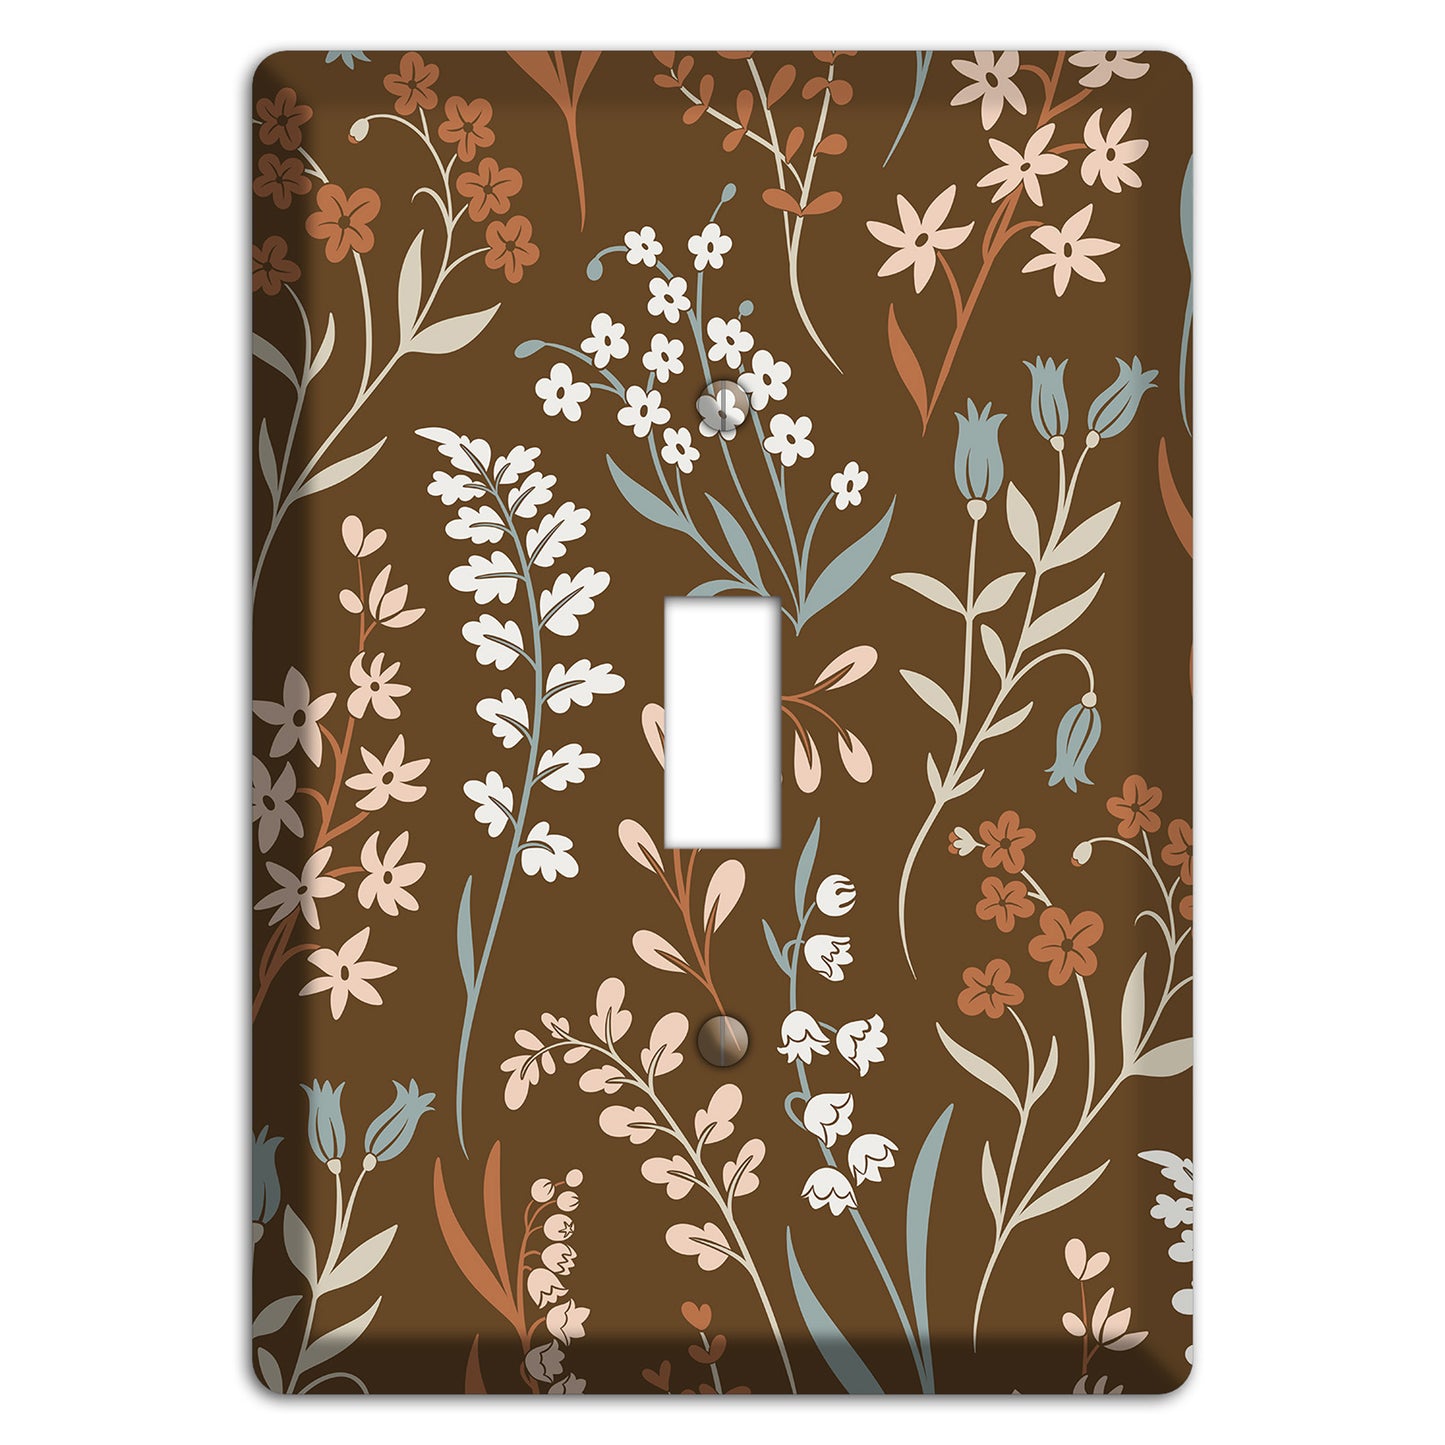 Fall Floral 1 Cover Plates